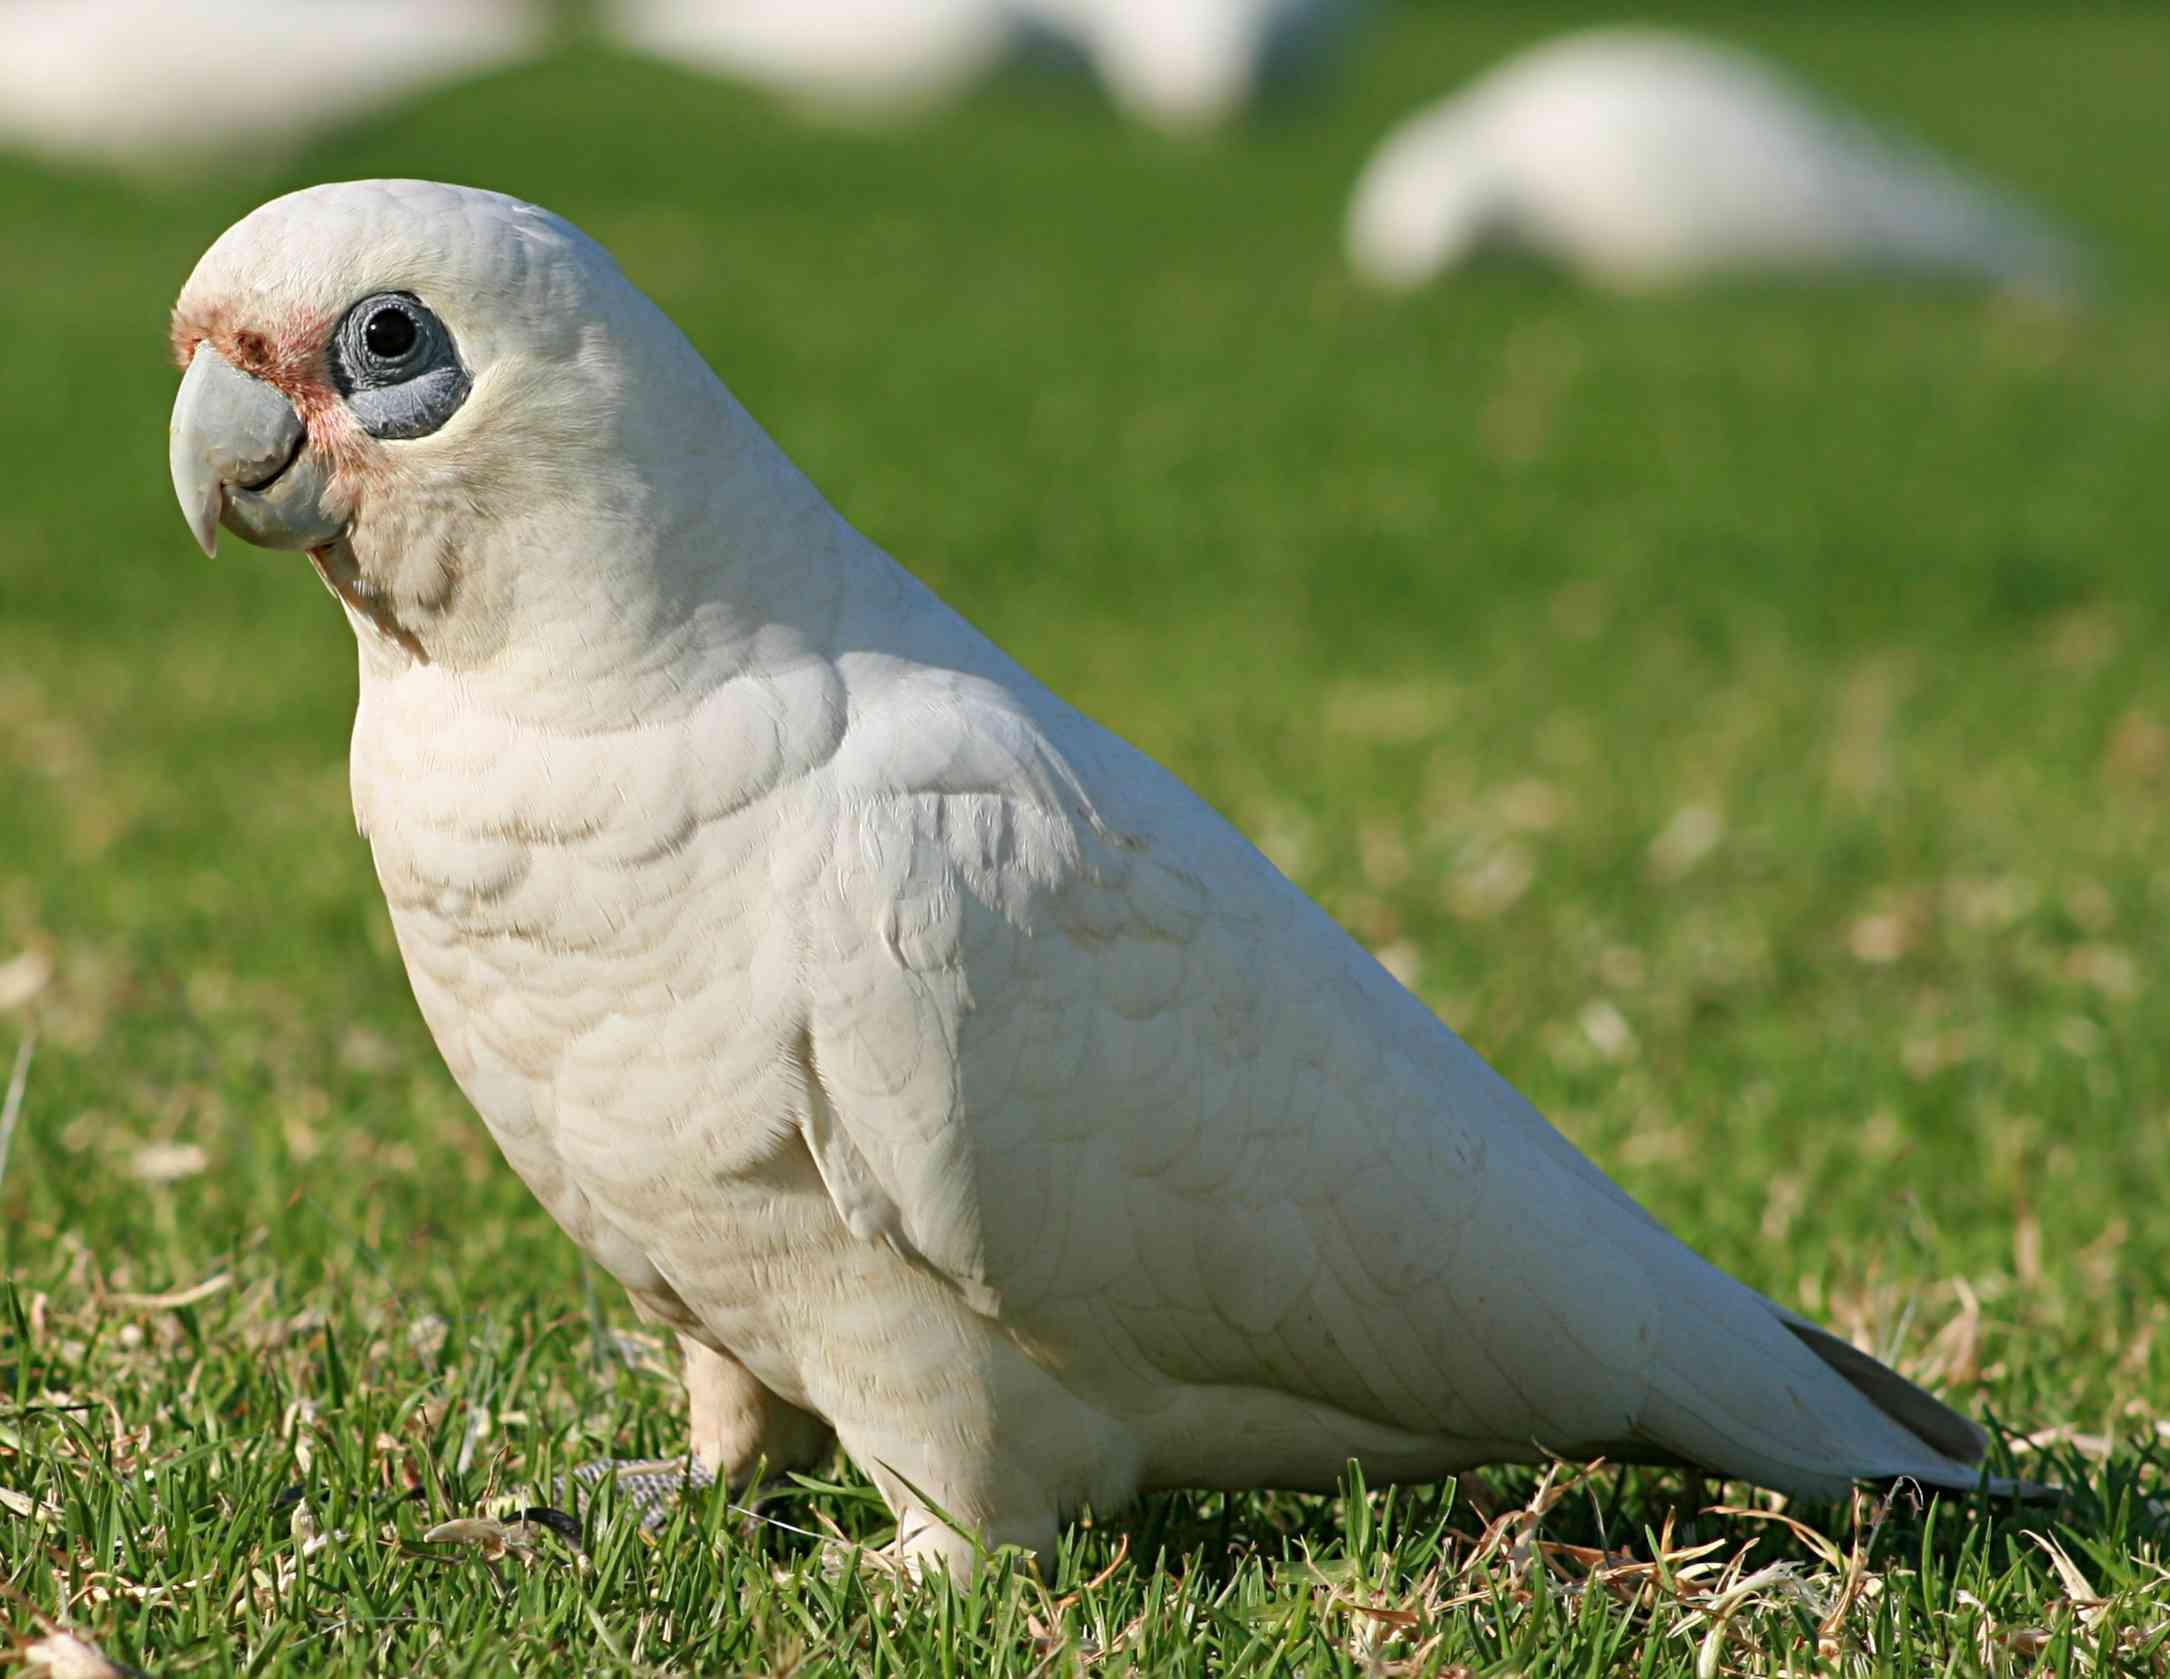 bare-eyed cockatoo standing on grass